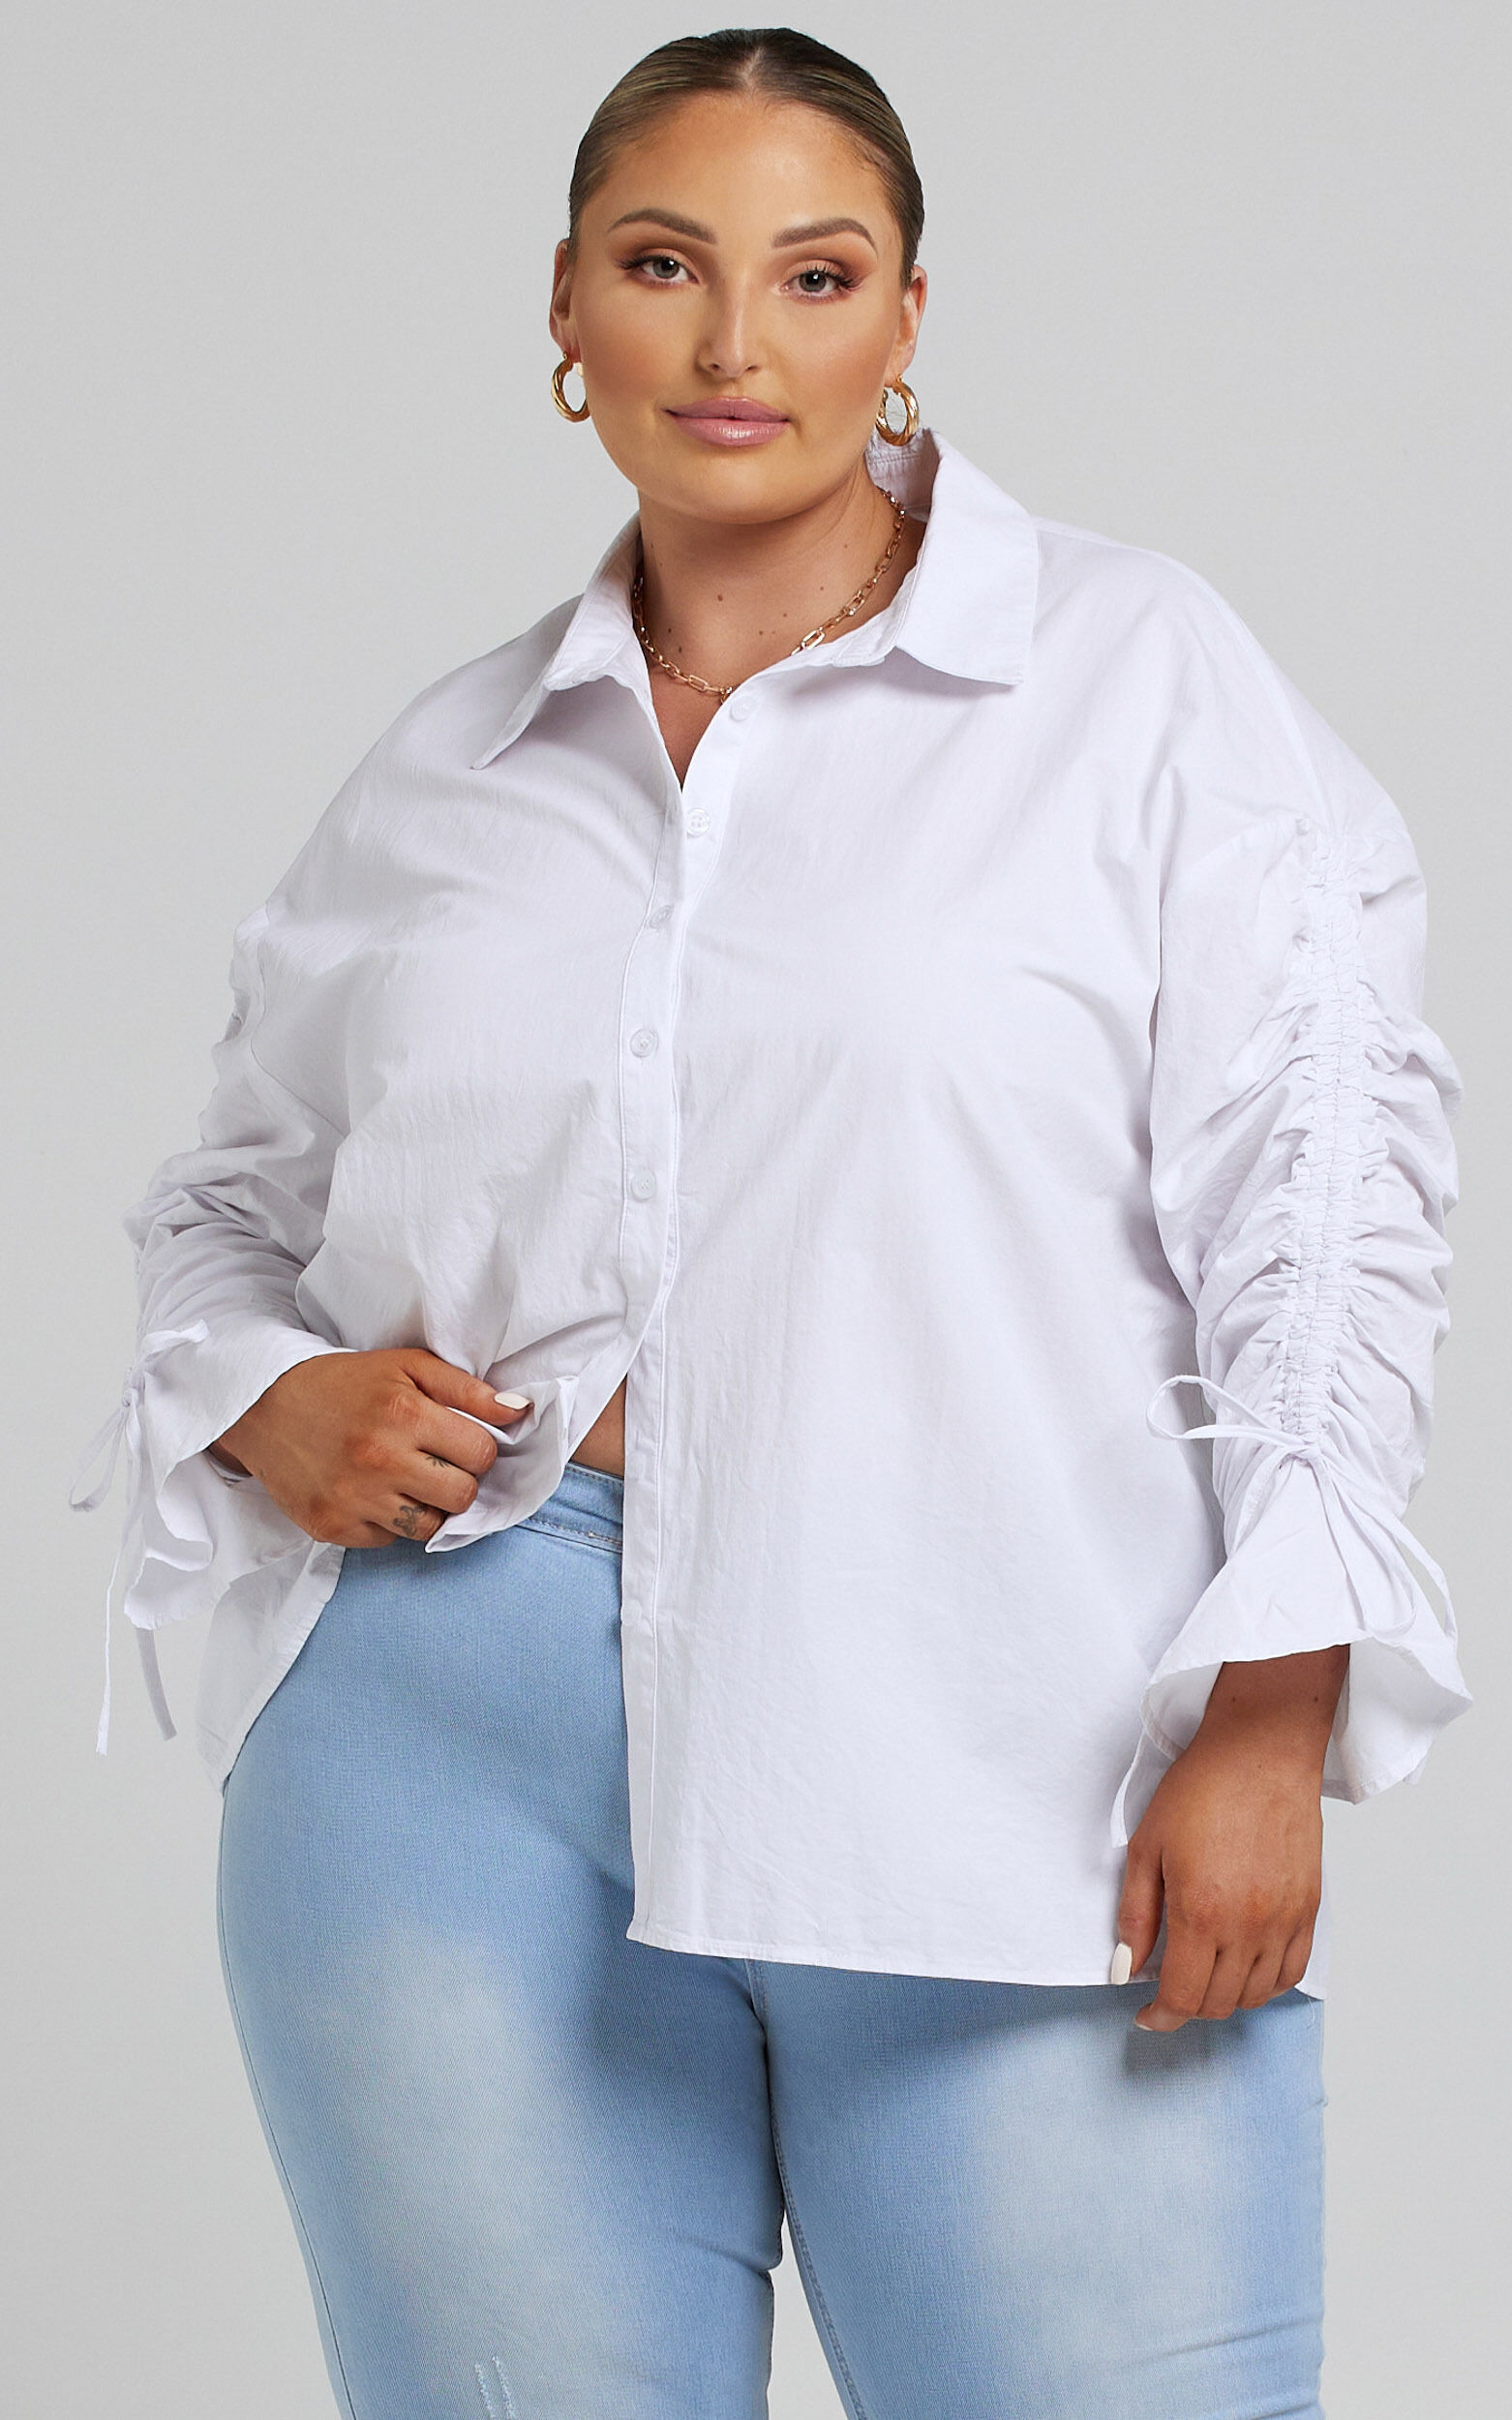 Melli Longsleeve Ruched Shirt in White - 04, WHT2, super-hi-res image number null